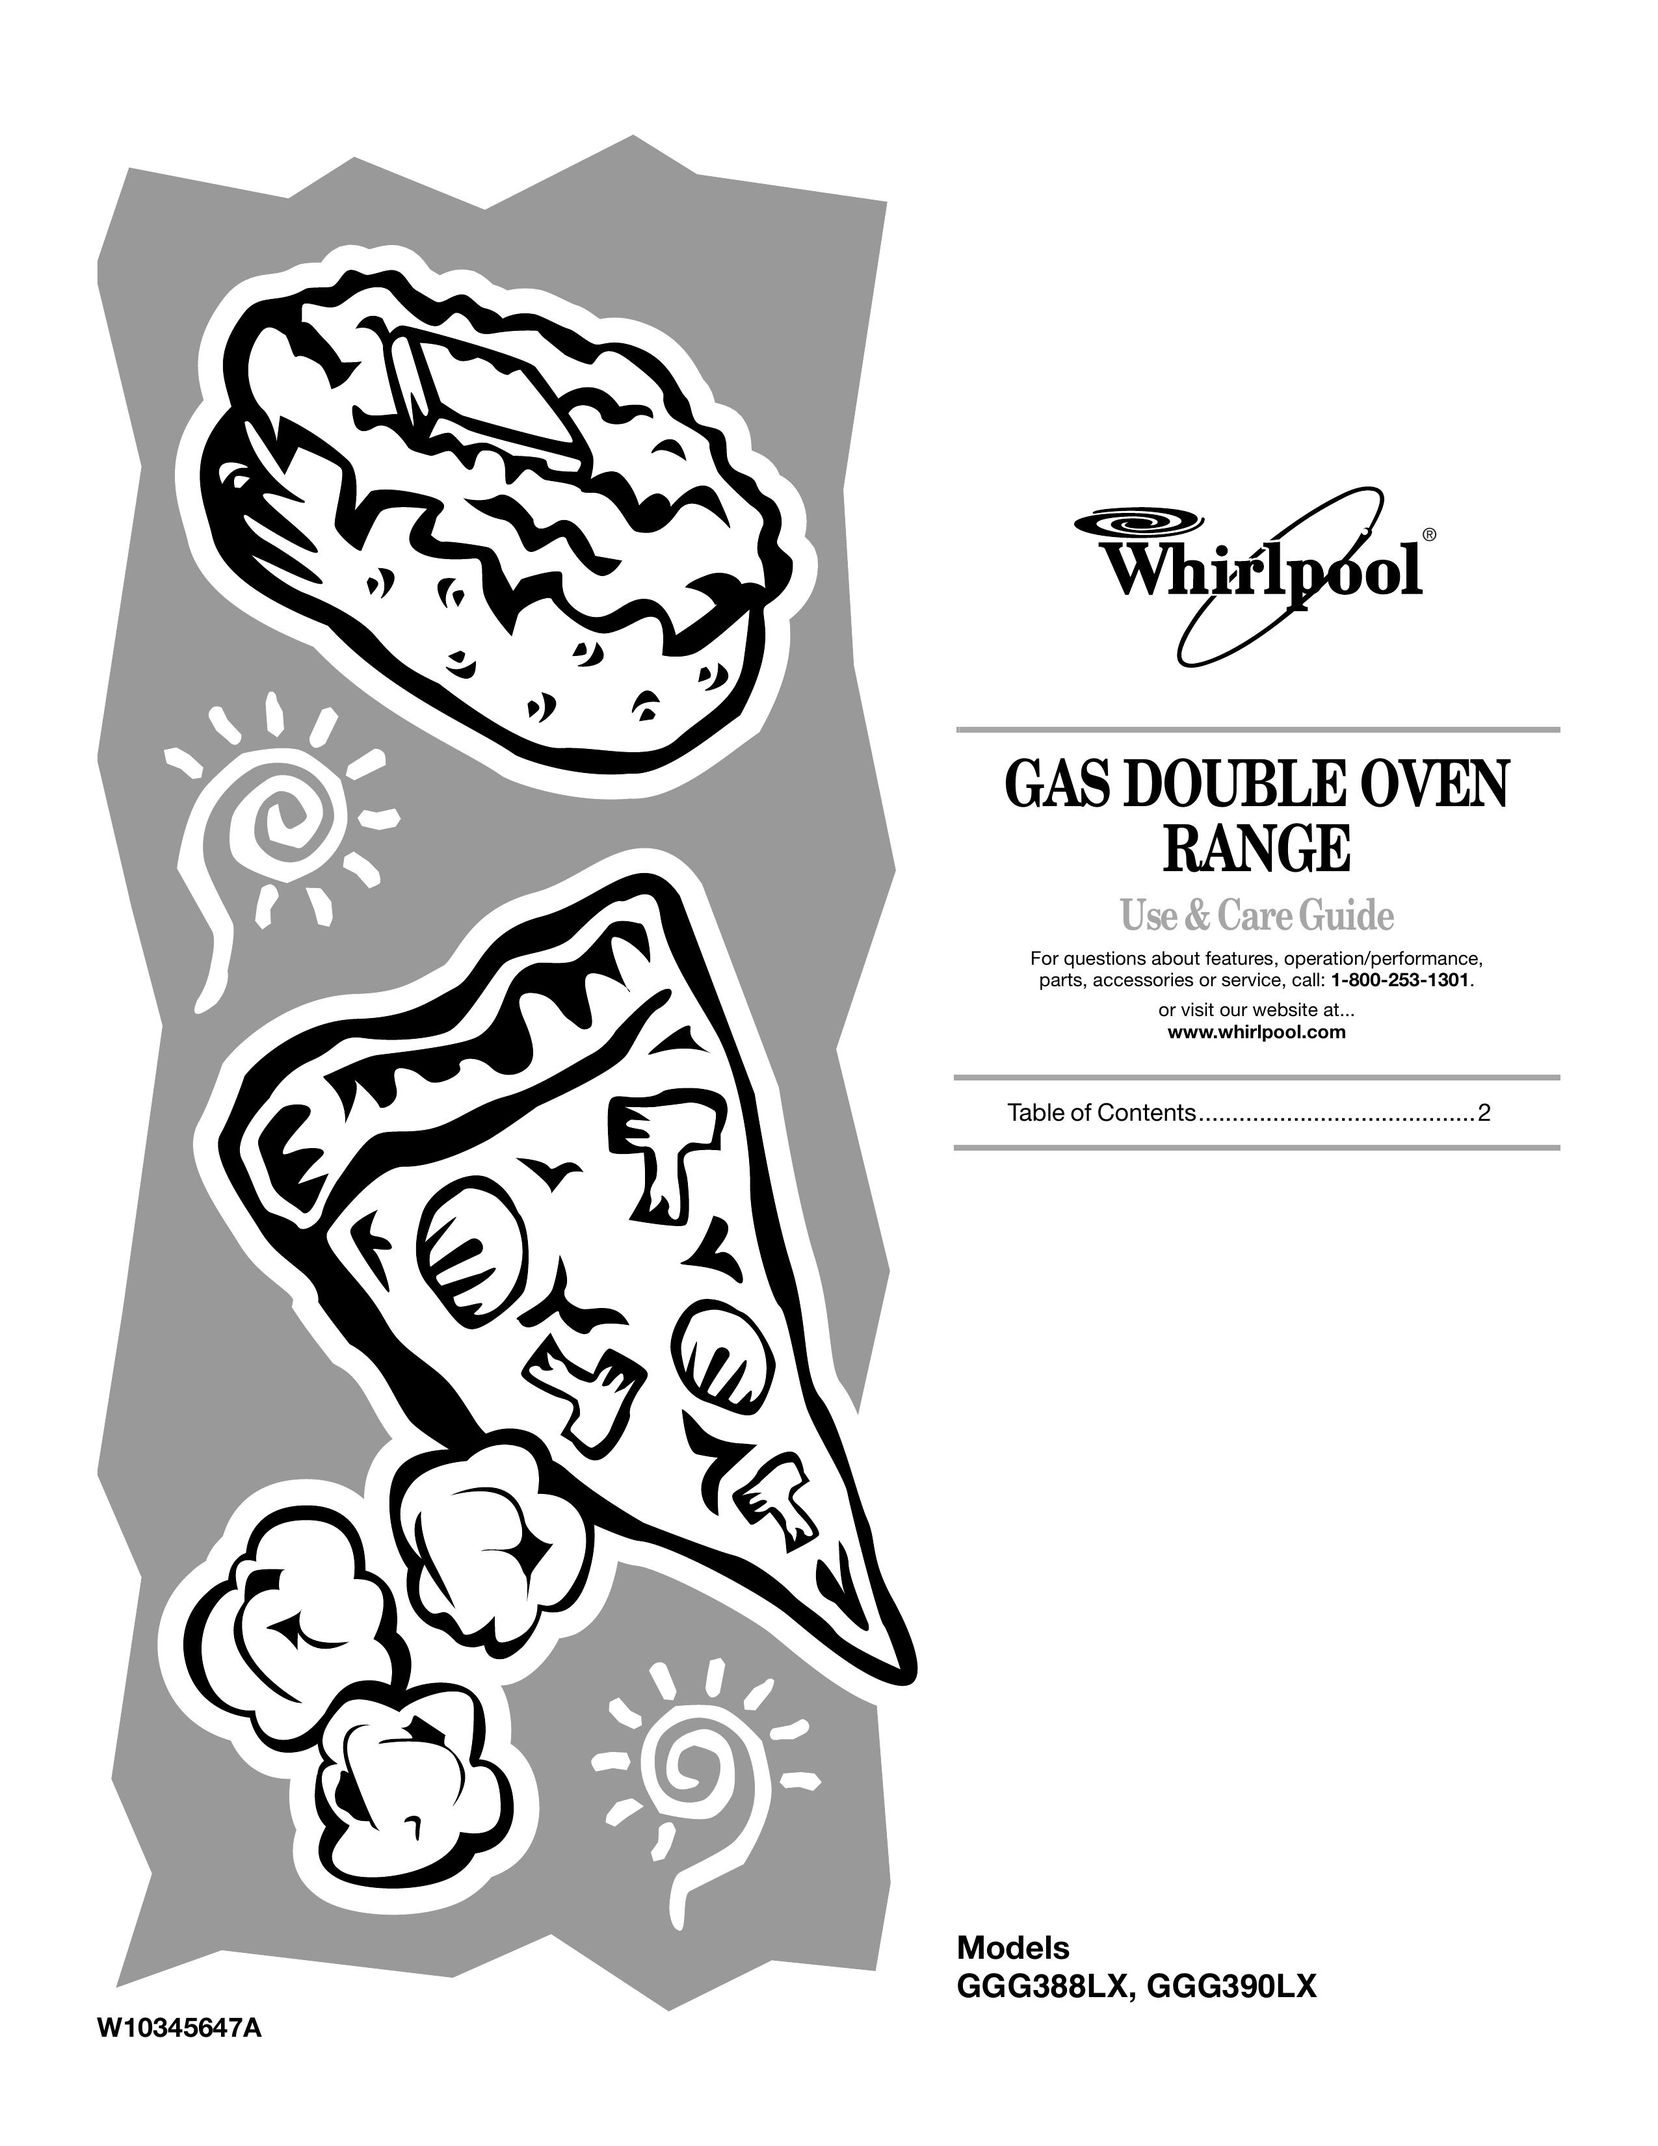 Whirlpool GGG390LX Double Oven User Manual